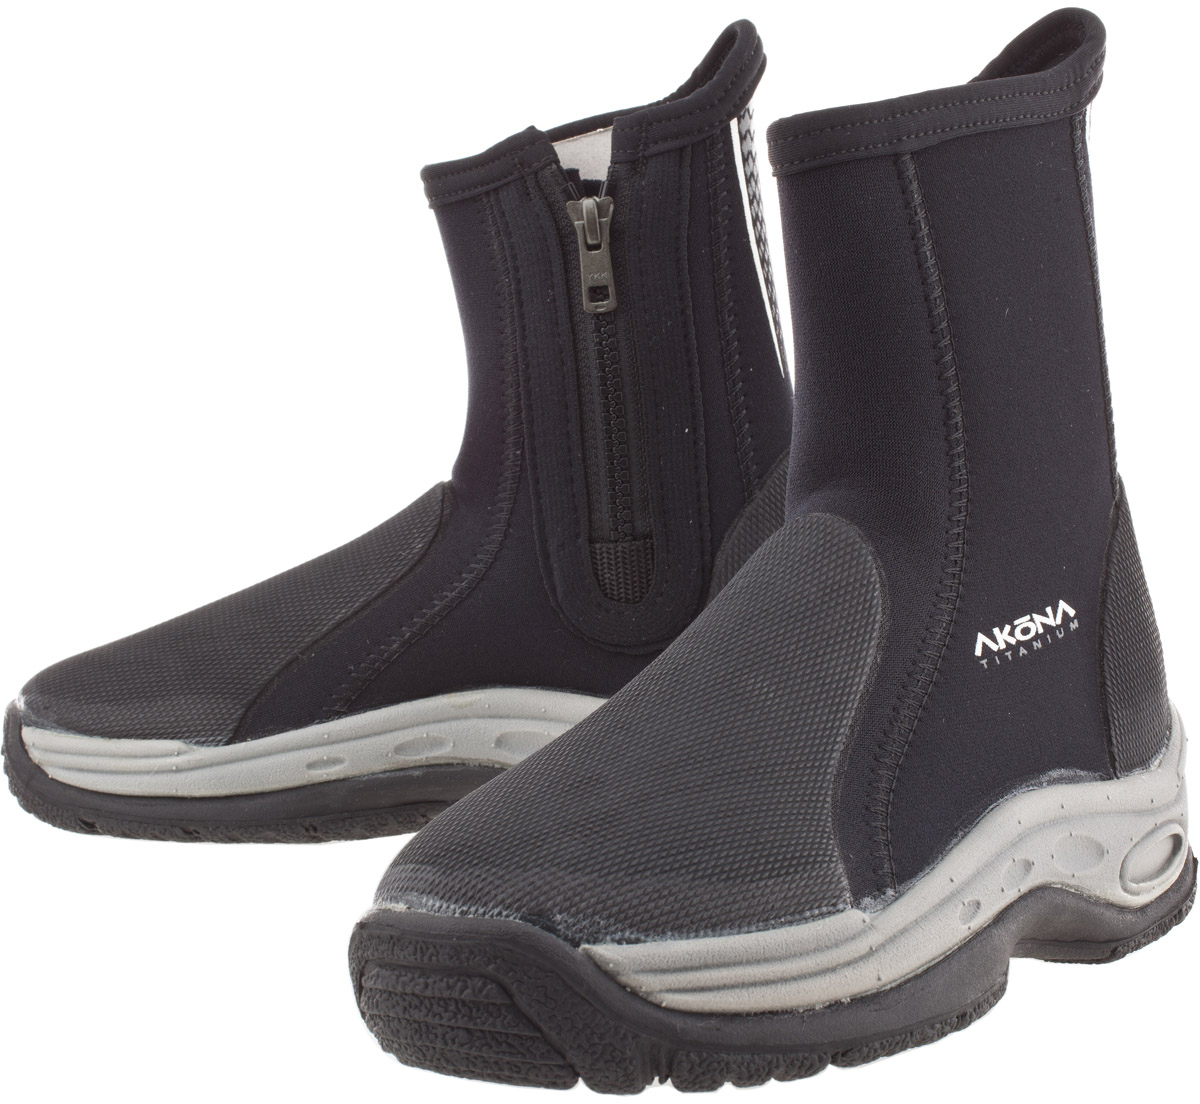 Akona Deluxe 3.5mm Molded Sole Boot